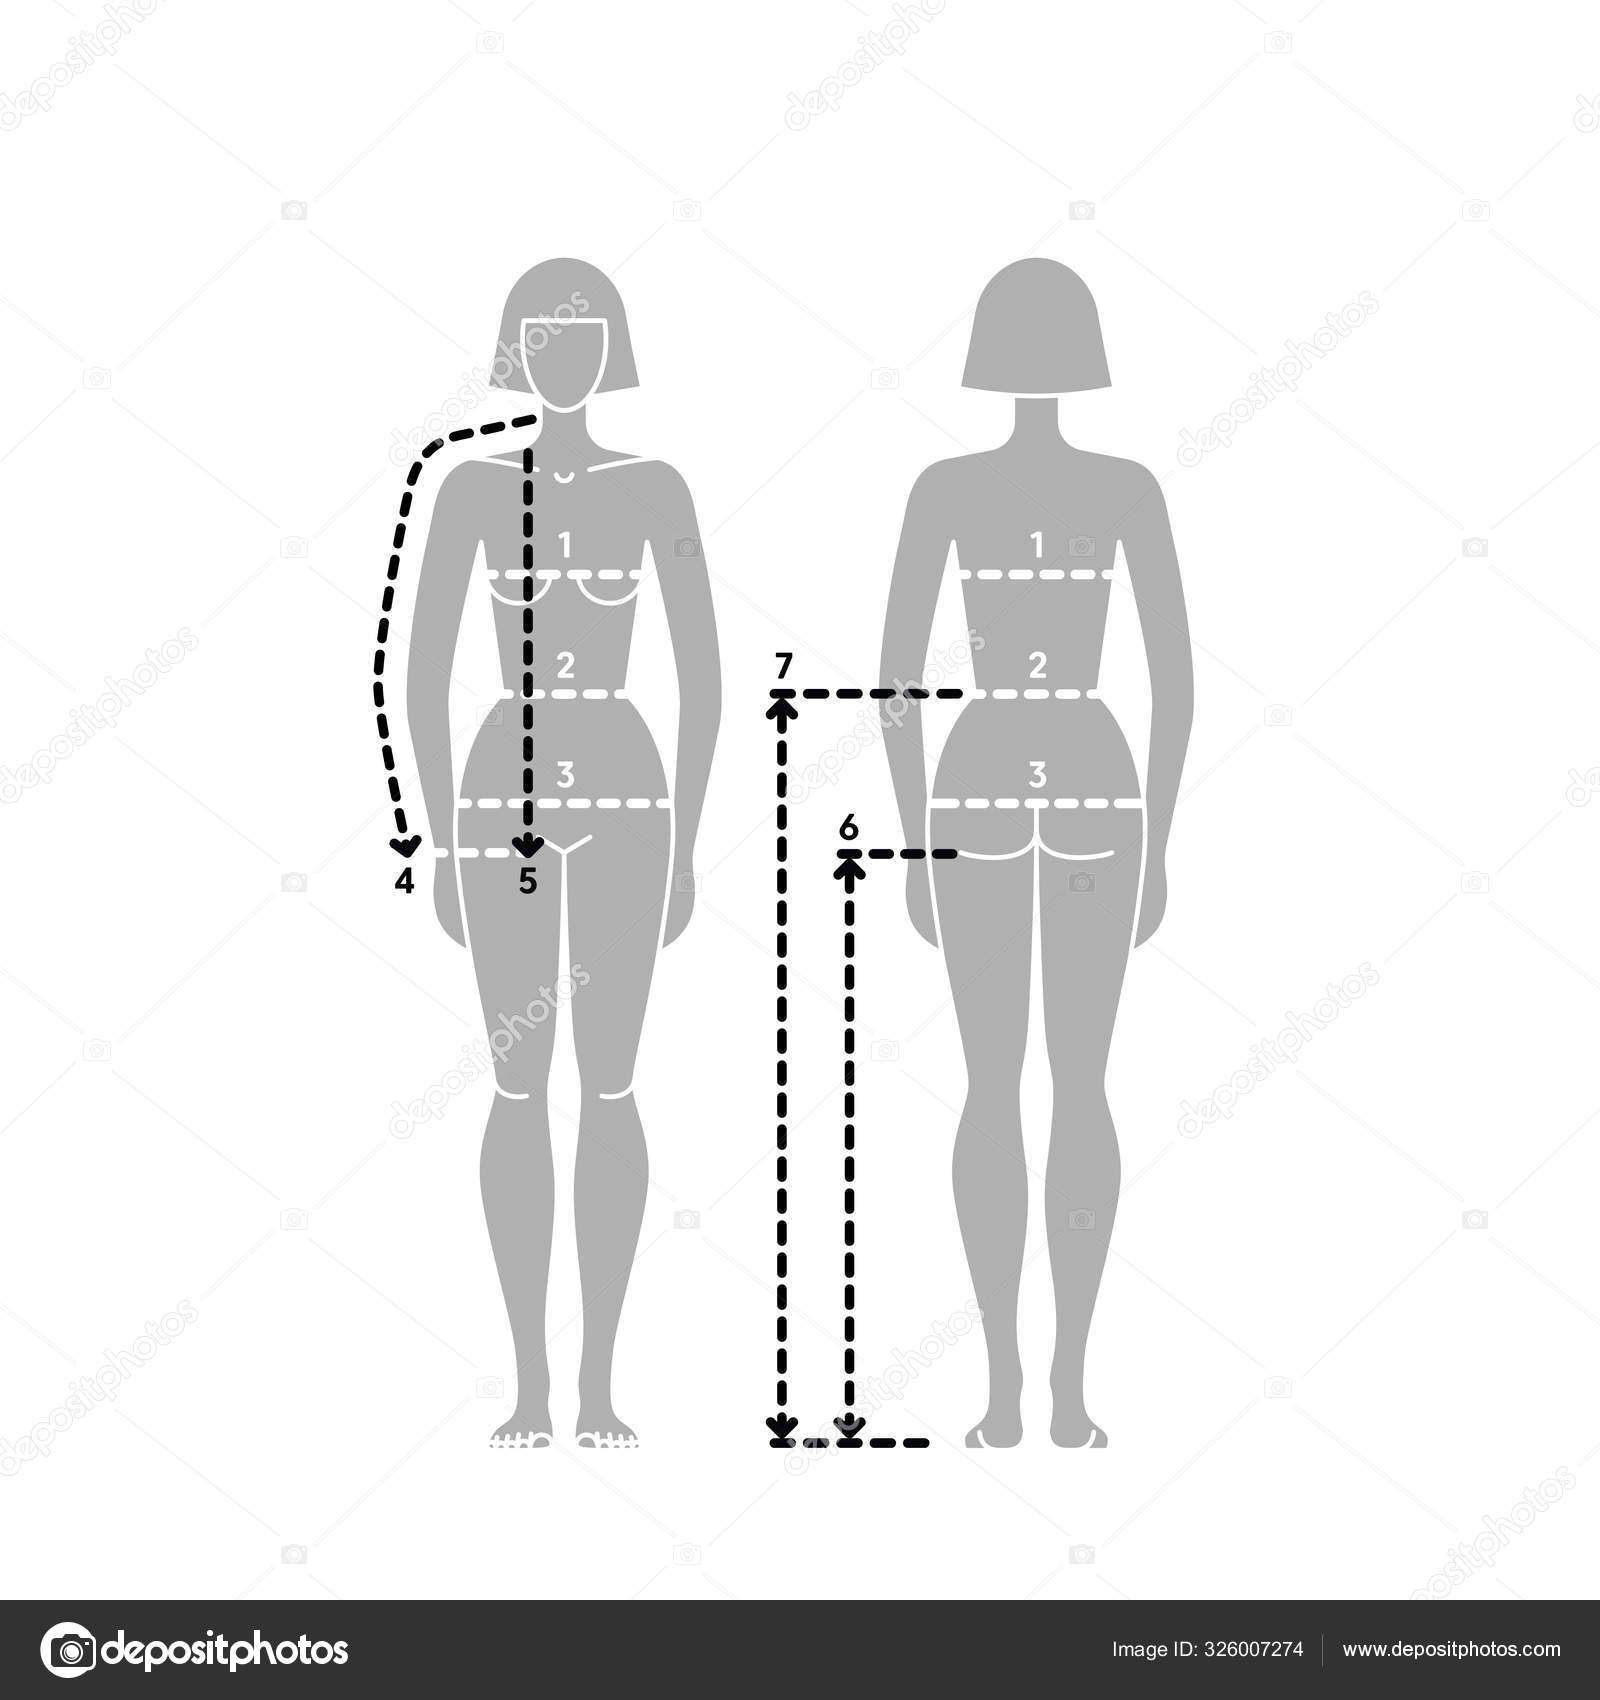 Outline measurements female body Royalty Free Vector Image